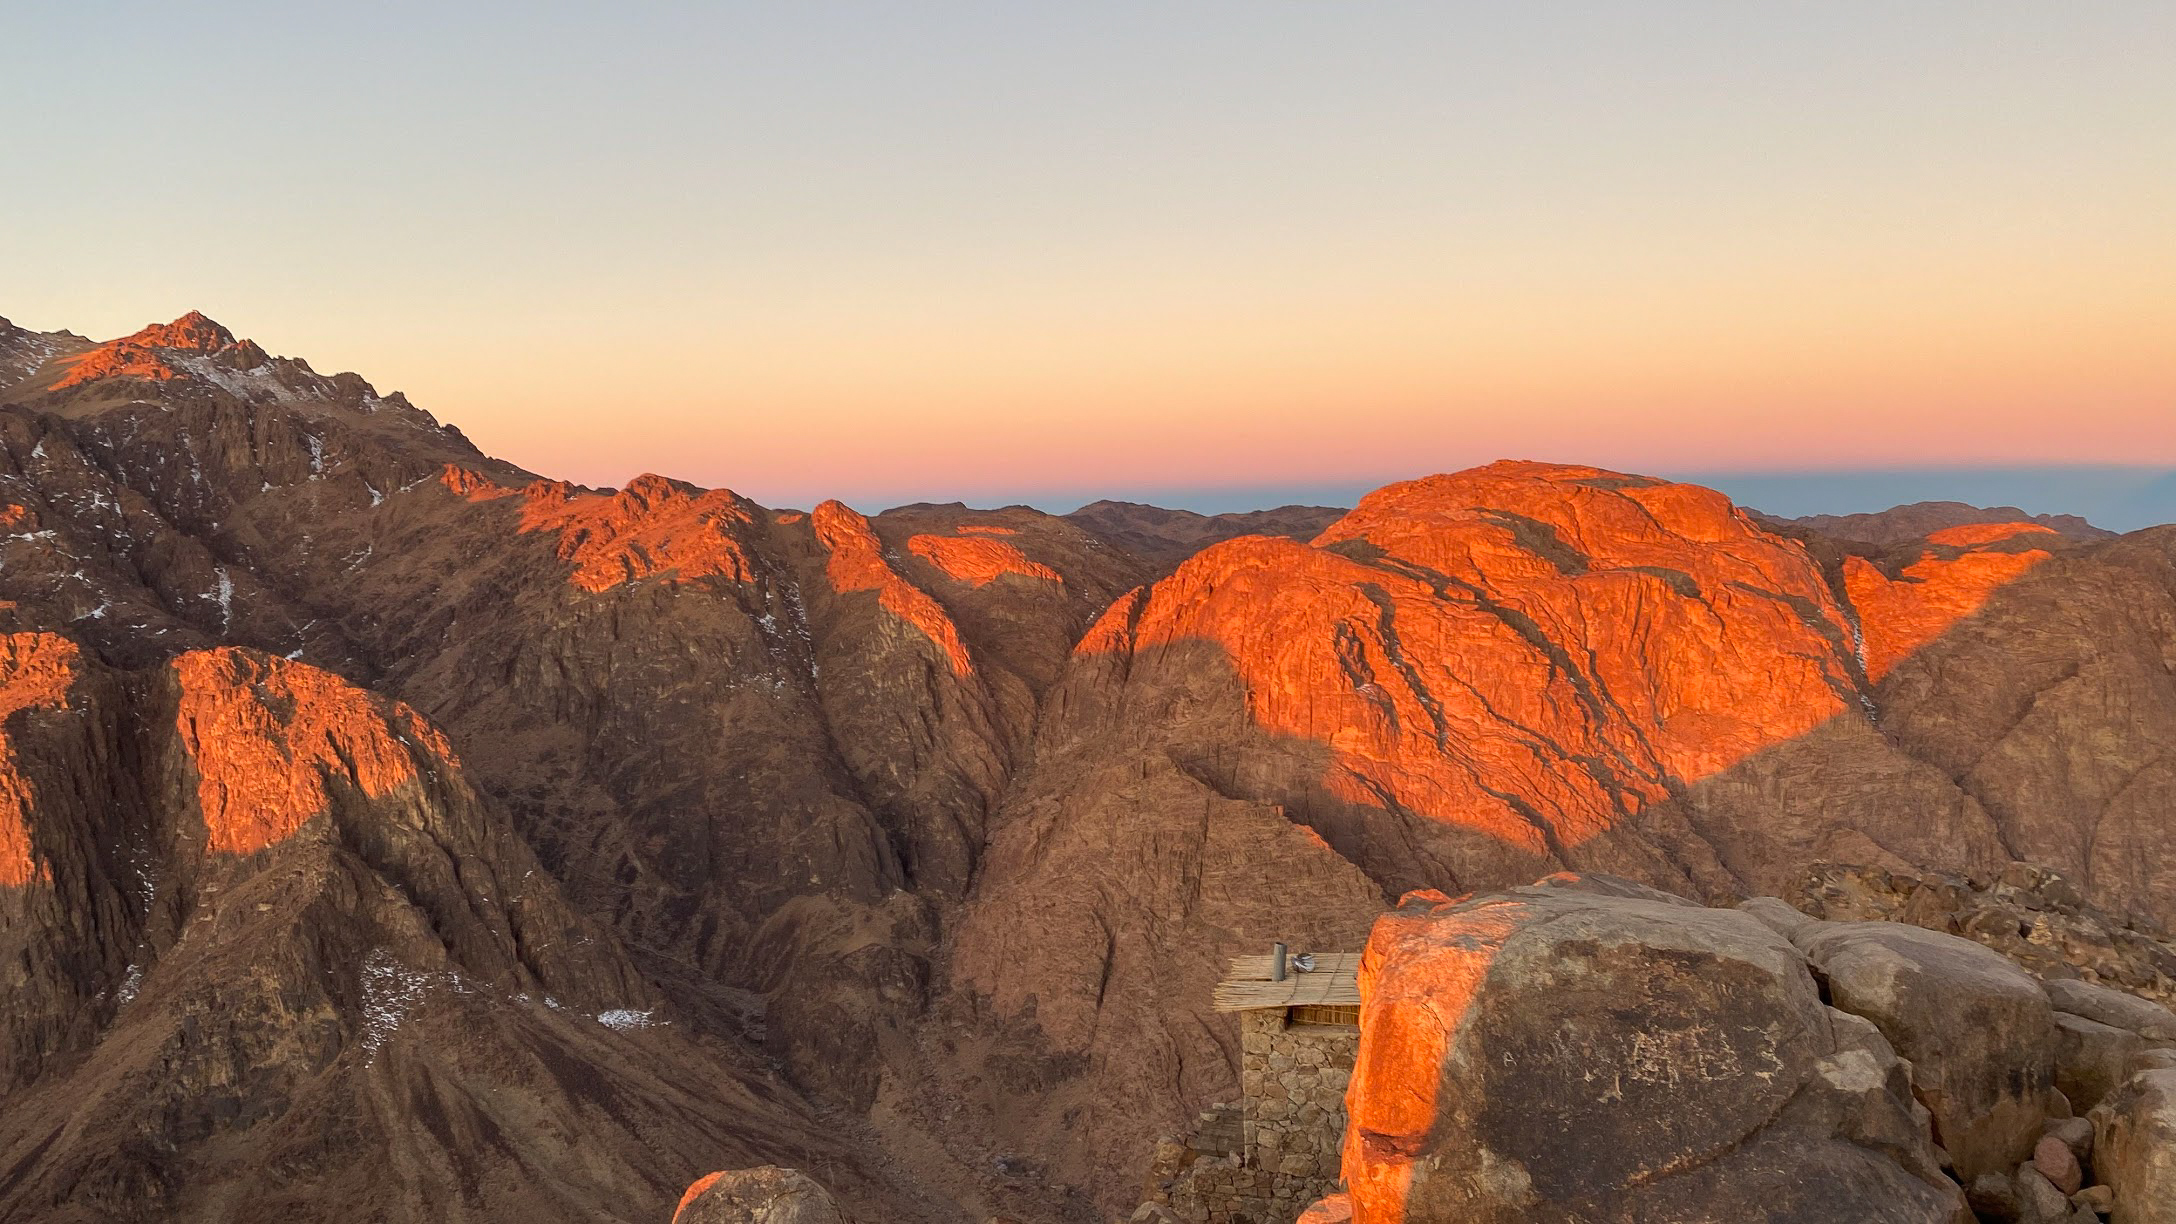 The orange sunrise and the shadows cast over the mountains of Mount Sinai, Egypt